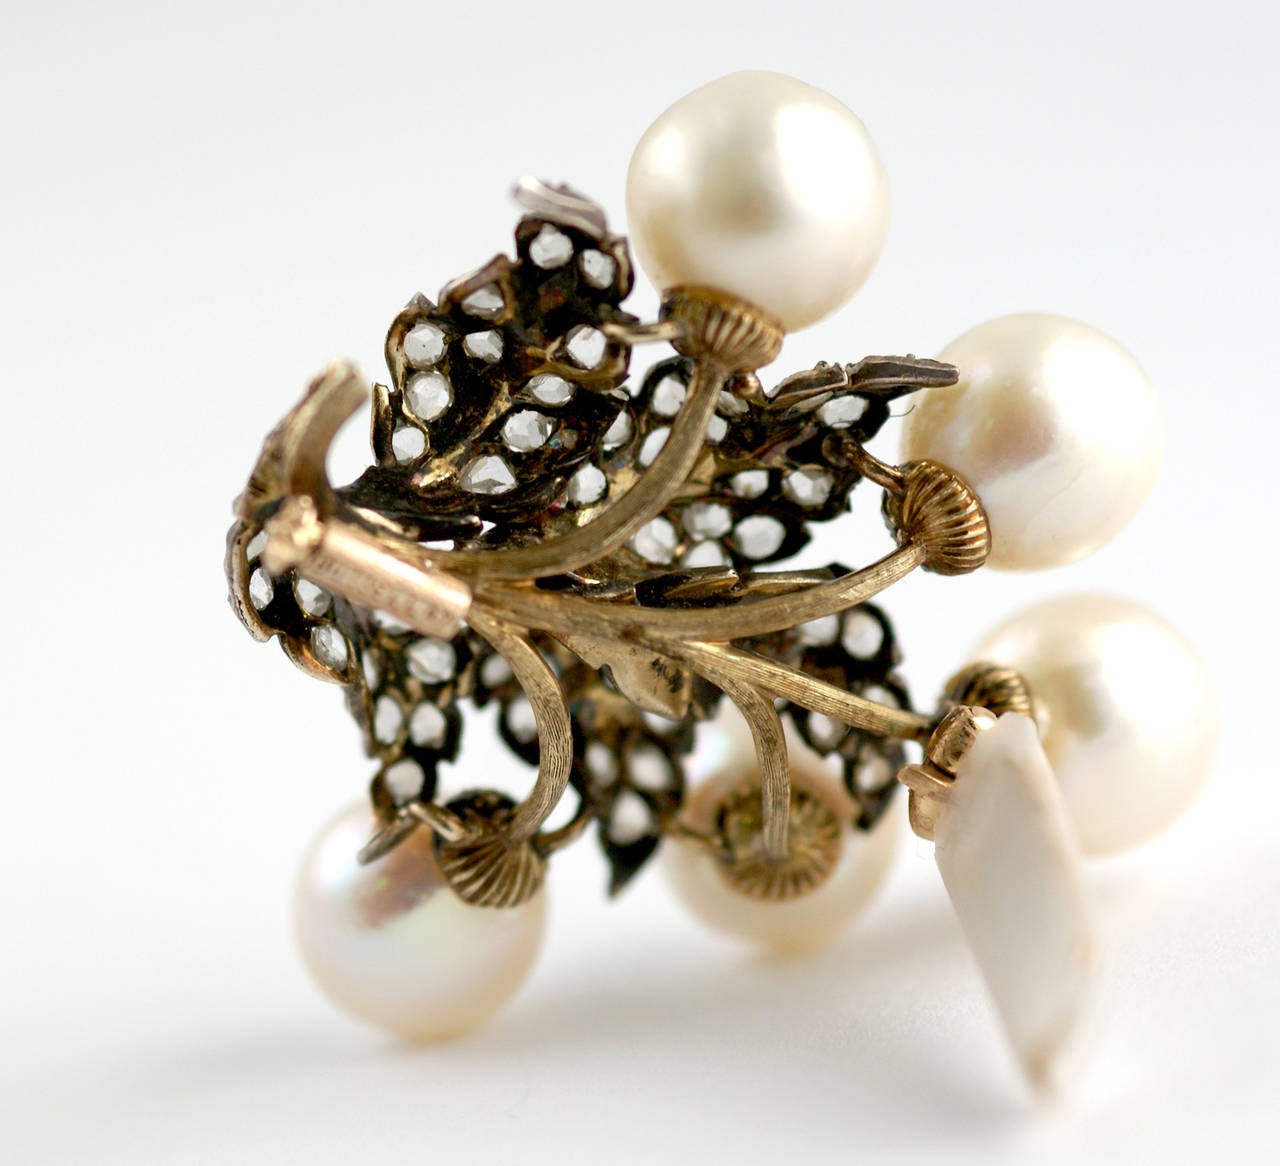 A sophisticated brooch in the typical style of the house, presenting pearls and rose cut diamonds on a mixed 18kt white and yellow gold mounting. Signed Buccellati, circa 1965.